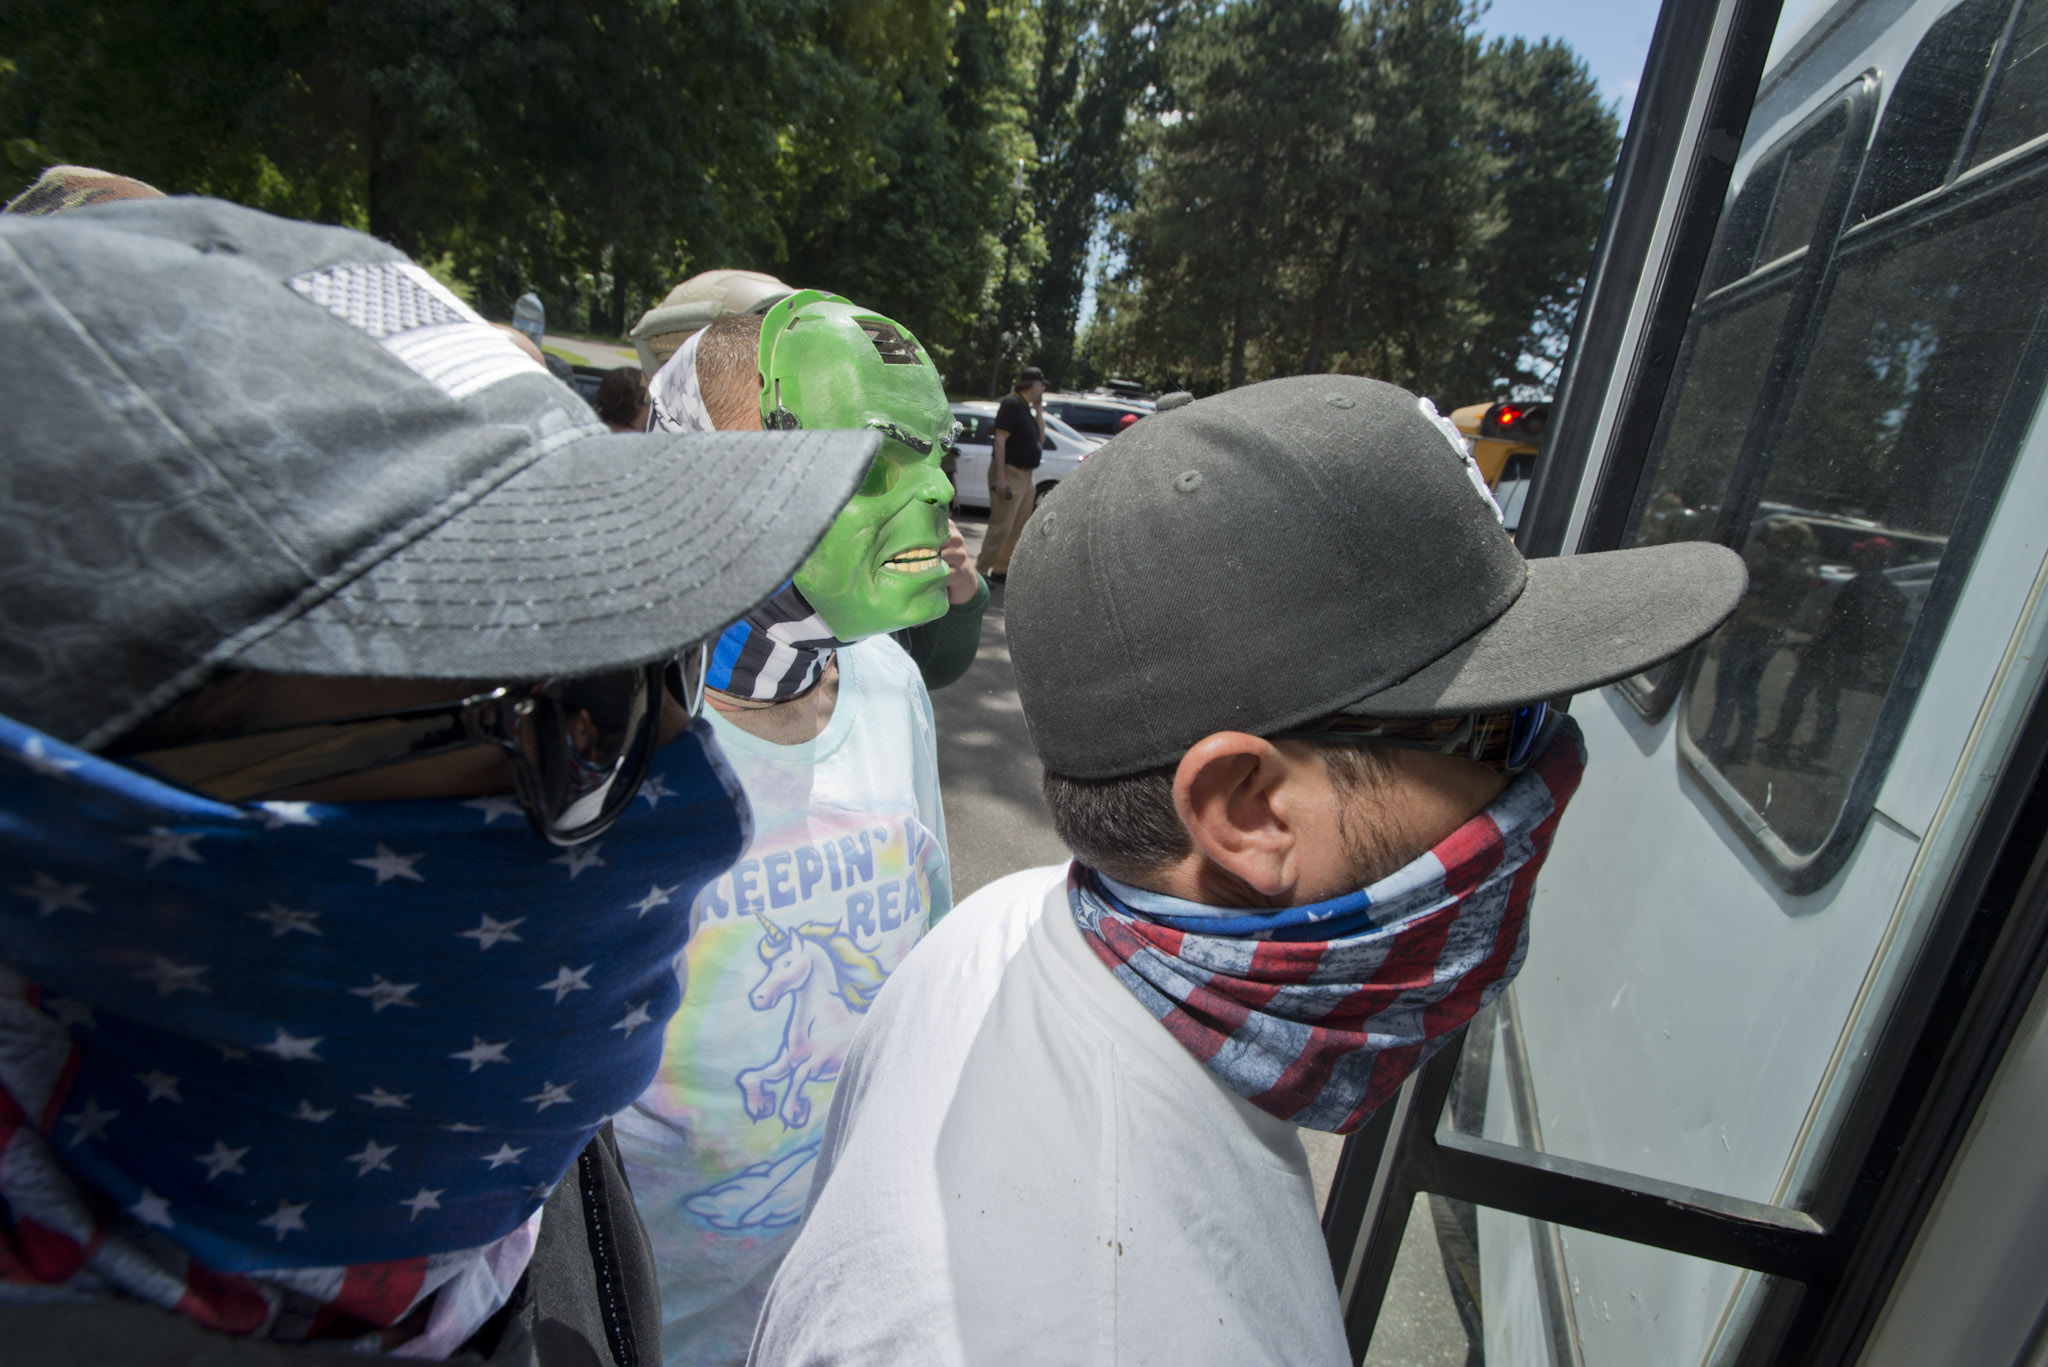 The Patriot Prayer movement, headed by Joey Gibson, gathers in Vancouver on Aug. 4 to board buses to take them to Gibson's speech at Tom McCall Waterfront Park in Portland. Patriot's Prayer, Proud Boys, and the Three Percenters load into transport buses headed to the Portland protest. Citing the potential for violence, Southwest Washington Communities United for Change canceled a planned rally scheduled for Saturday that was intended to be a show of unity and condemnation of what it says is growing racism in the area. An organization press release in advance of the now-canceled event specifically mentioned the Aug. 4 rally for Gibson.